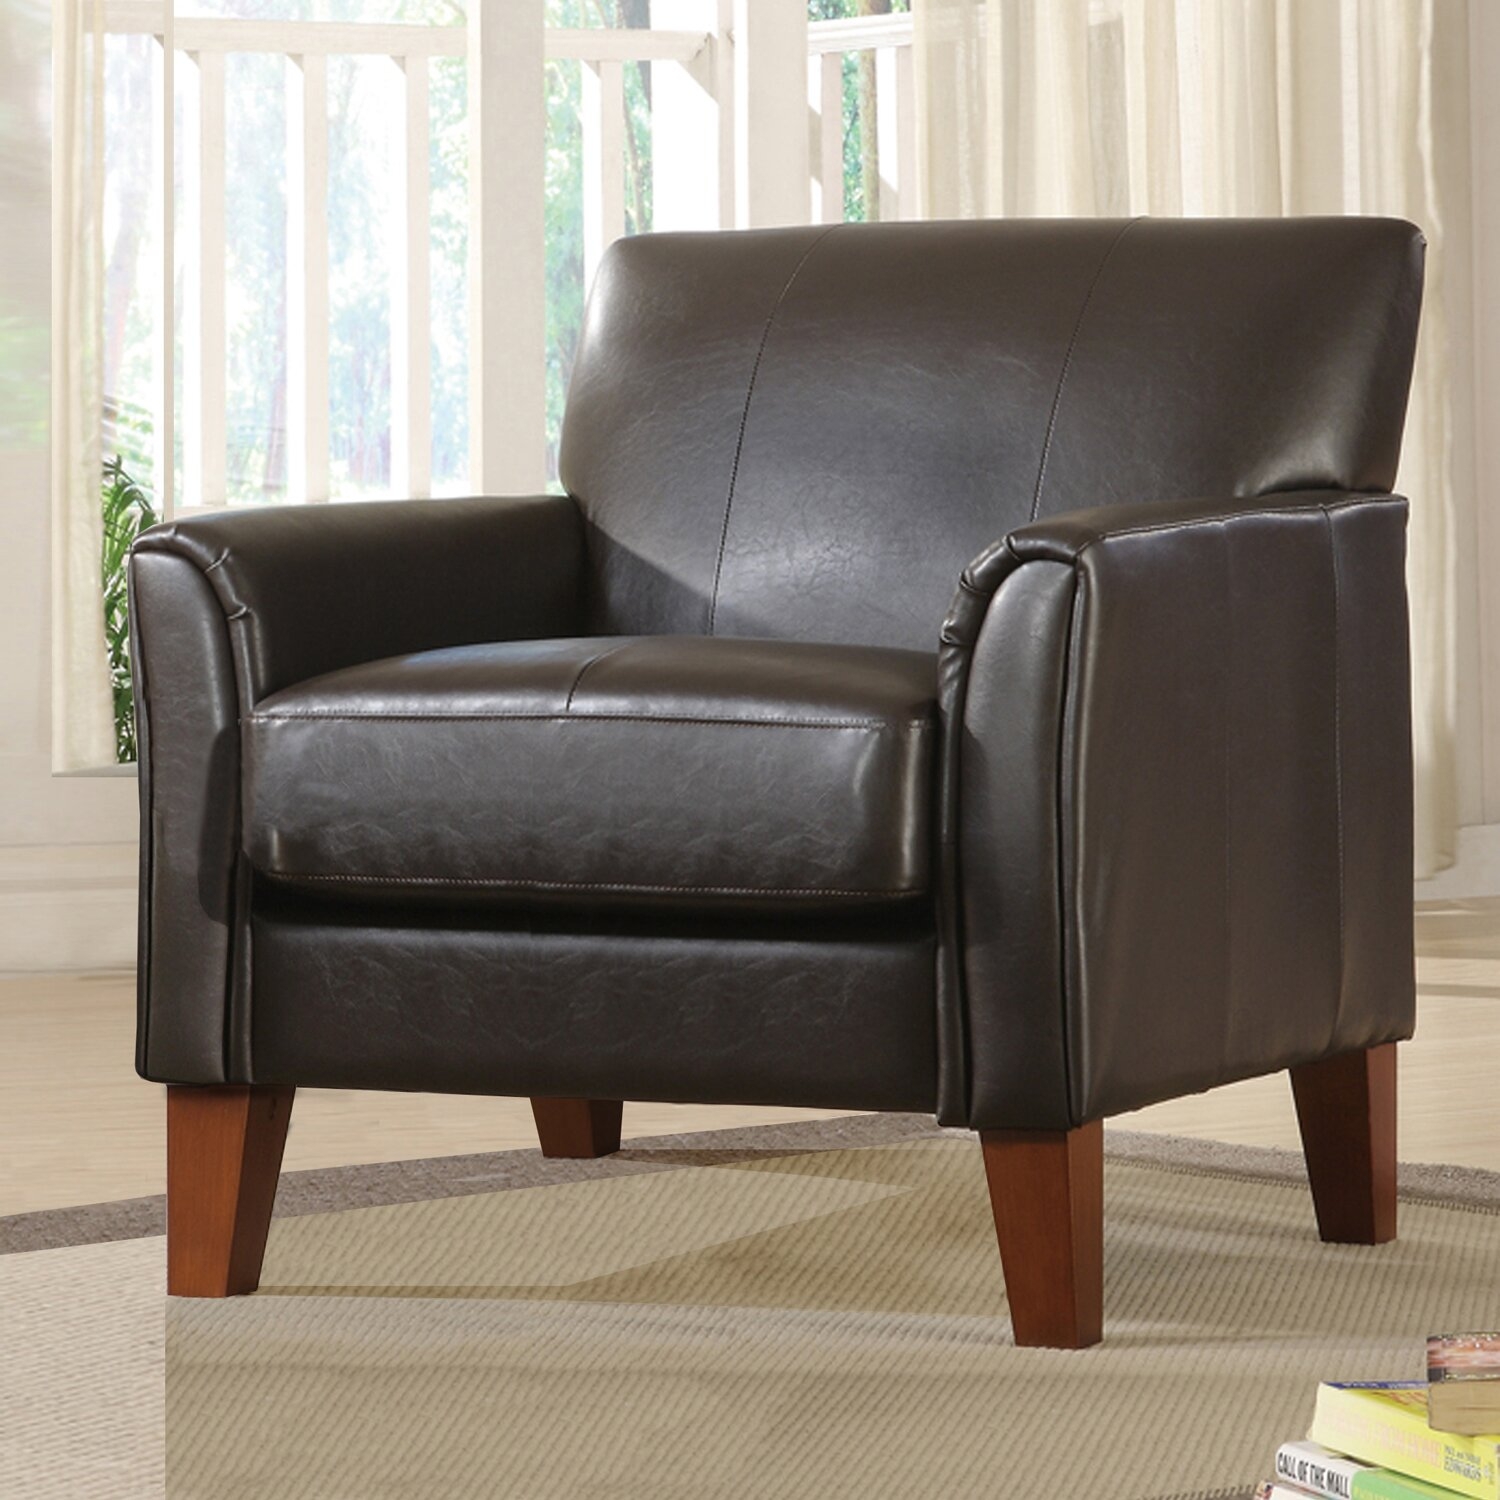 Tribecca Home Uptown Dark Brown Faux Leather Accent Chair Shopping The Best Deals On Chairs 